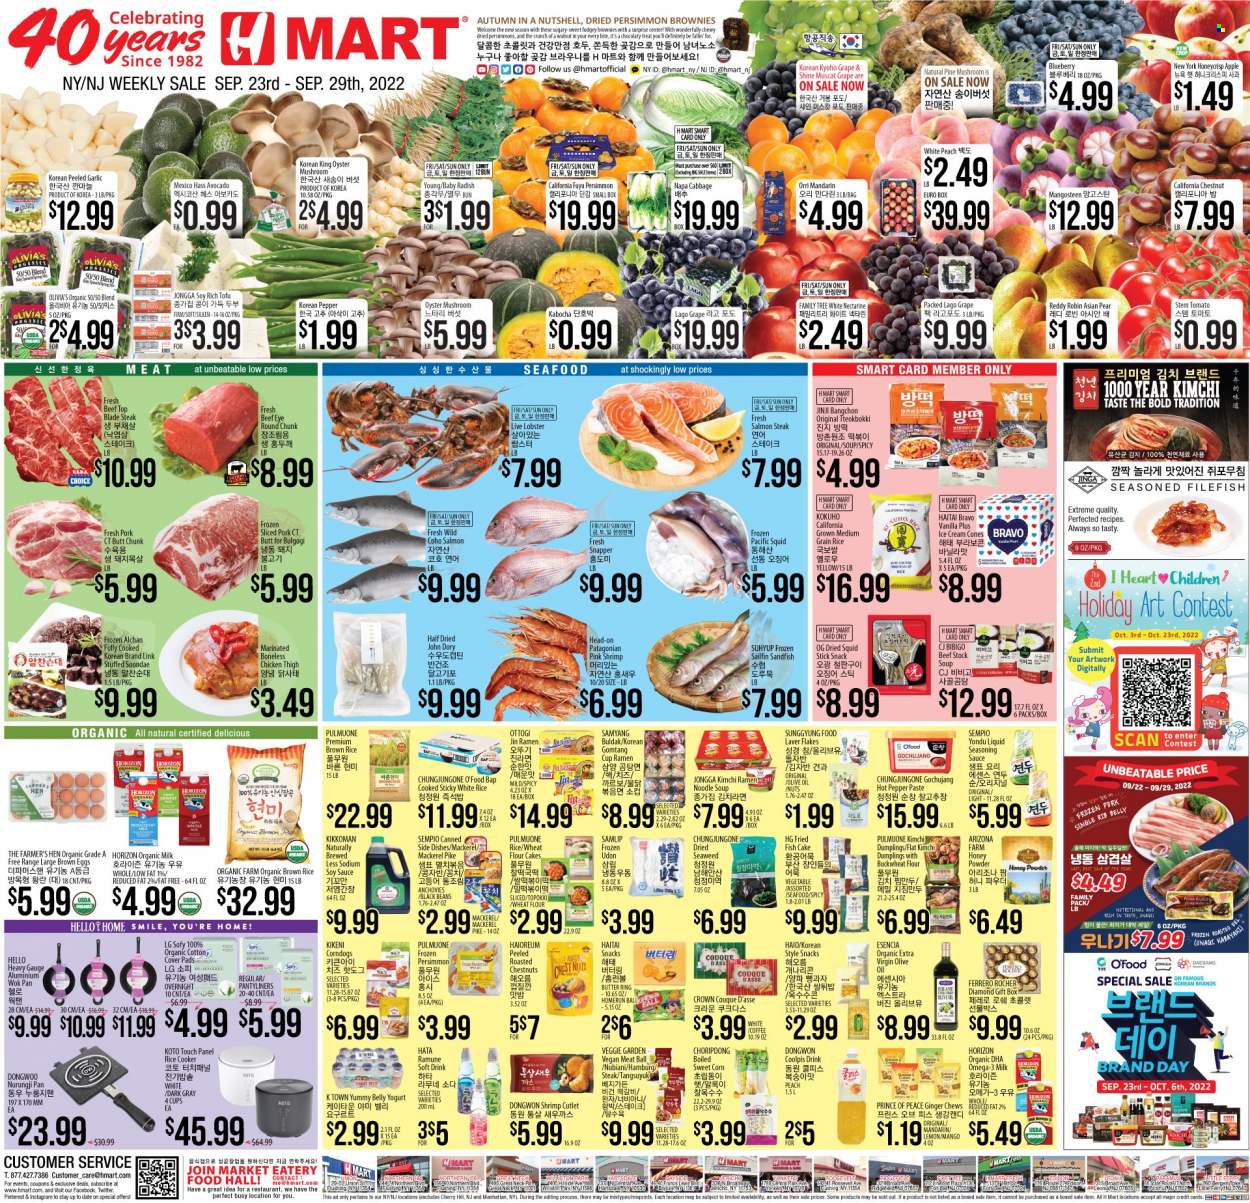 thumbnail - Hmart Flyer - 09/23/2022 - 09/29/2022 - Sales products - oyster mushrooms, mushrooms, brownies, cabbage, corn, garlic, radishes, pumpkin, sweet corn, avocado, mandarines, pears, persimmons, lobster, mackerel, salmon, squid, John Dory, oysters, seafood, fish, shrimps, fried fish, ramen, soup, sauce, dumplings, noodles cup, noodles, tofu, yoghurt, organic milk, eggs, butter, ice cream, fish cake, snack, Ferrero Rocher, chewing gum, flour, wheat flour, seaweed, anchovies, black beans, brown rice, buckwheat, white rice, spice, soy sauce, Kikkoman, extra virgin olive oil, olive oil, oil, chestnuts, soft drink, AriZona, soda, coffee, beef meat, steak, eye of round, top blade, pantyliners, pan, wok, rice cooker, cup, Omega-3, nectarines. Page 1.